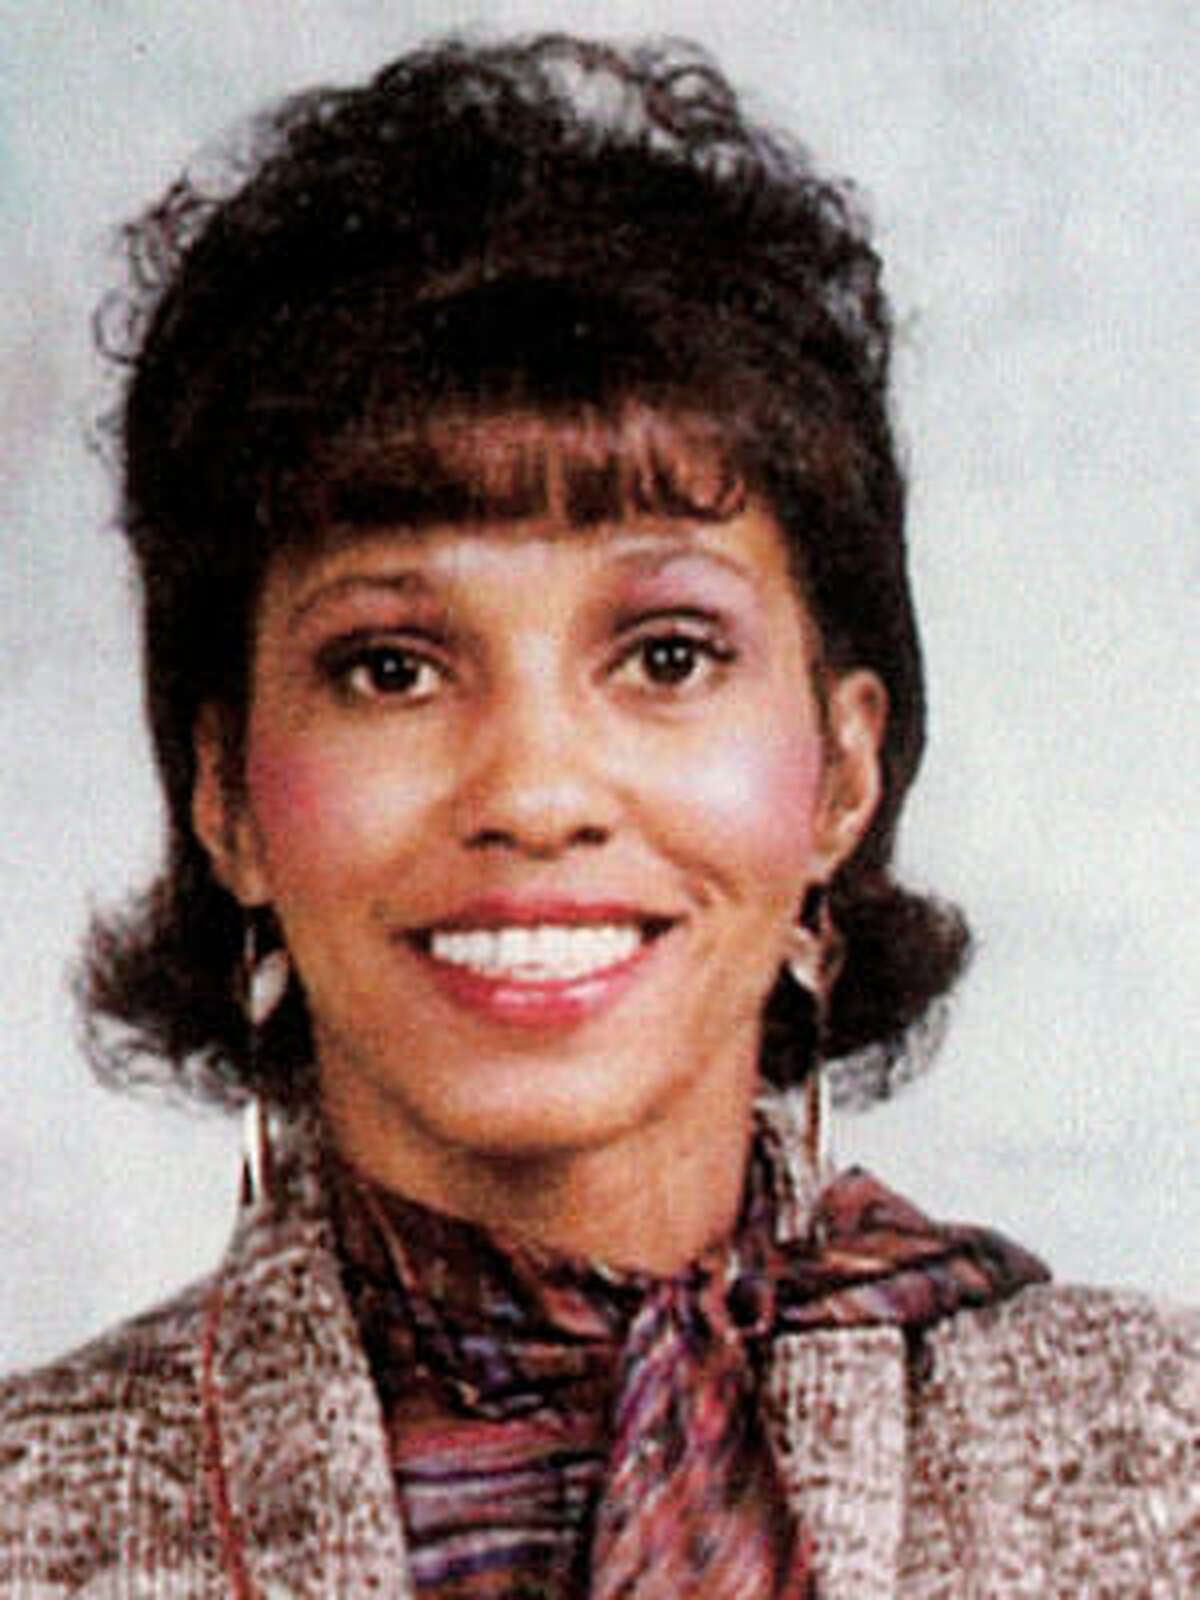 Retia Lafaye Long was found strangled on a stairway behind a church building.